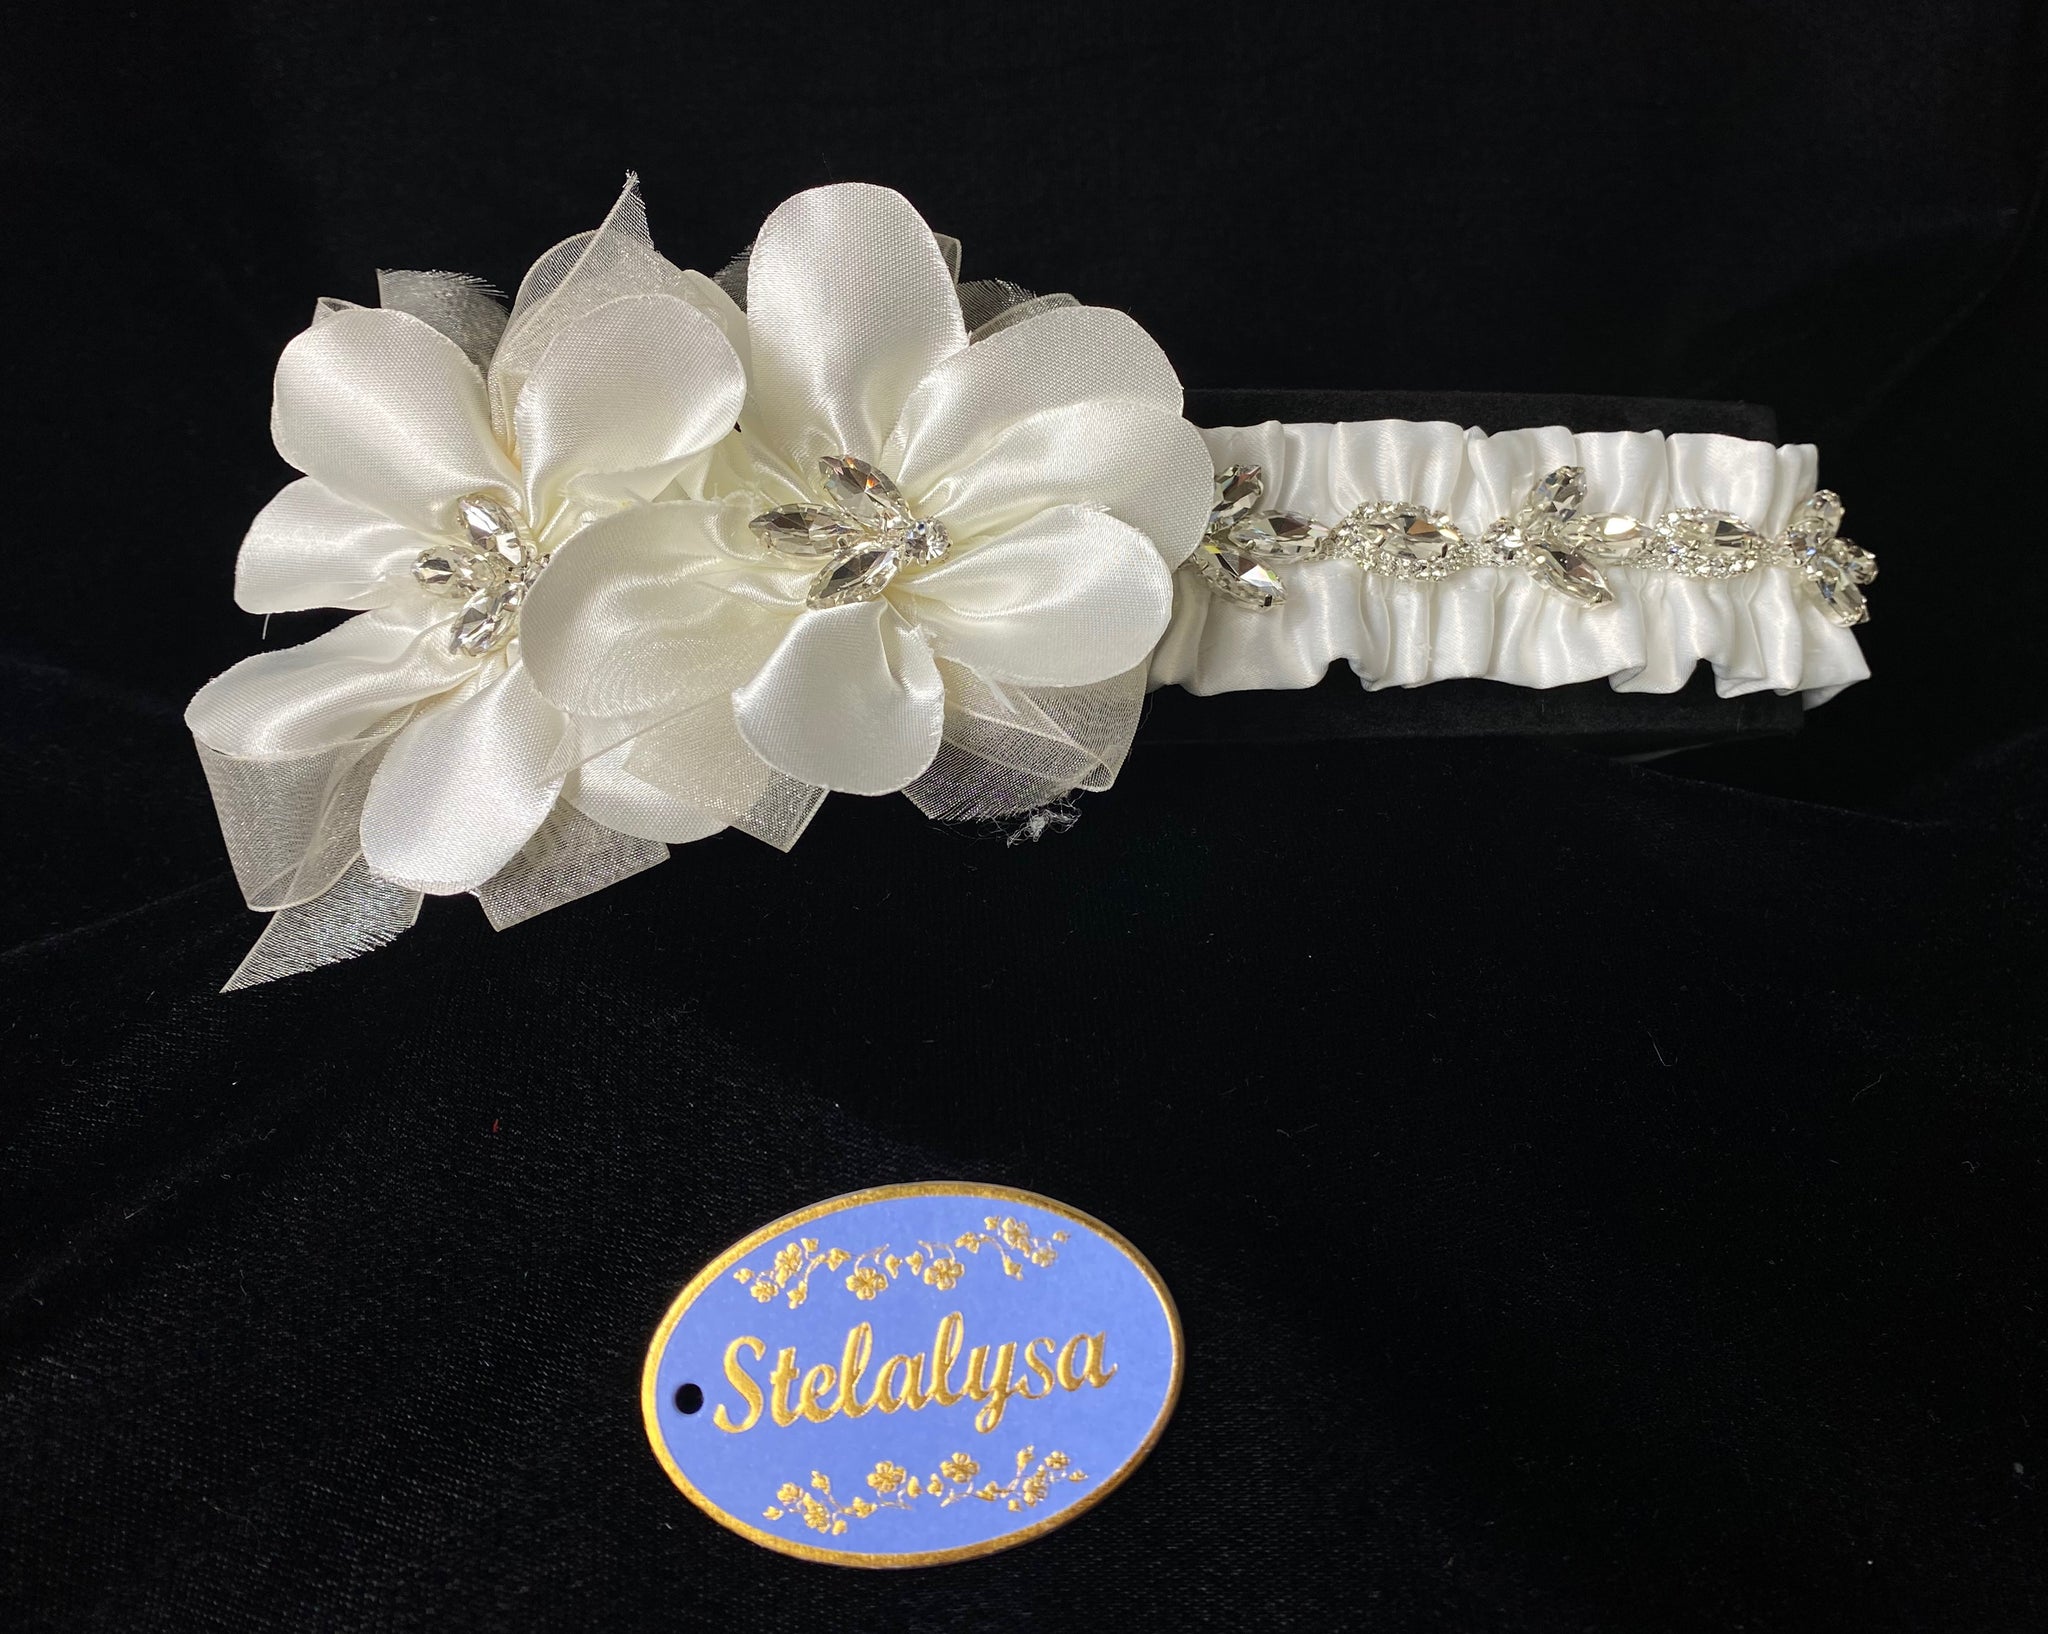 Baptism Headwrap  This is an elegant handmade and one-of-a-kind white satin headwrap with organza flowers and rhinestones.  Headwrap is elastic wrapped on soft satin material.   Your baby will look like the little princess she is with this headwrap on her special day!  